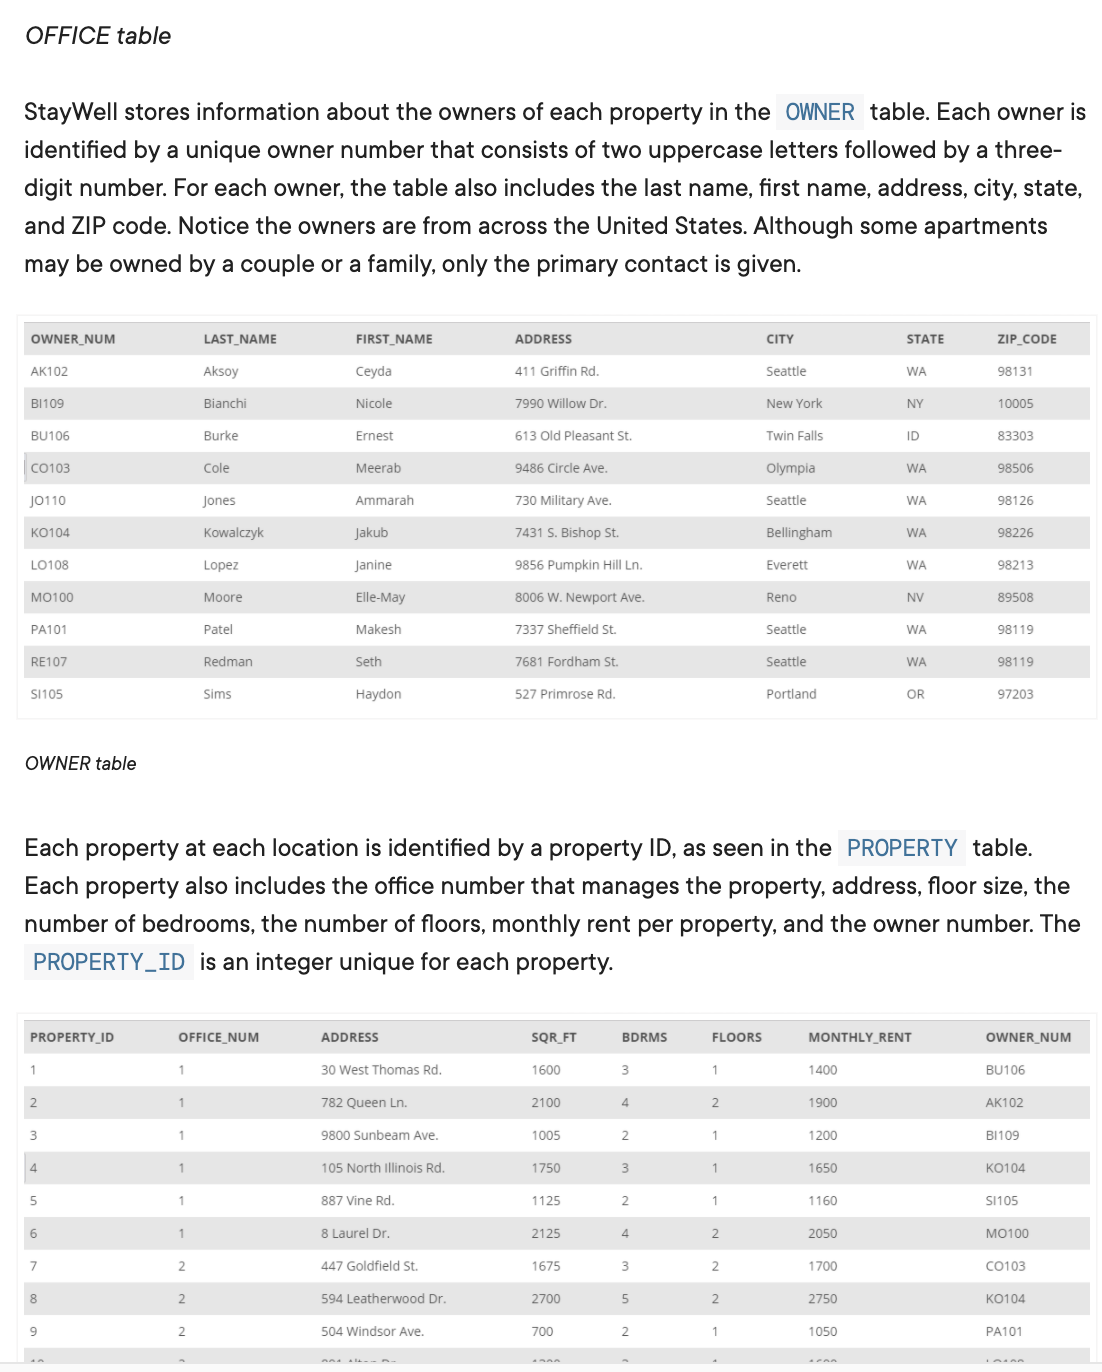 OFFICE table
StayWell stores information about the owners of each property in the OWNER table. Each owner is
identified by a unique owner number that consists of two uppercase letters followed by a three-
digit number. For each owner, the table also includes the last name, first name, address, city, state,
and ZIP code. Notice the owners are from across the United States. Although some apartments
may be owned by a couple or a family, only the primary contact is given.
OWNER_NUM
LAST_NAME
FIRST_NAME
ADDRESS
CITY
STATE
ZIP_CODE
AK102
Aksoy
Ceyda
411 Griffin Rd.
Seattle
WA
98131
BI109
Bianchi
Nicole
7990 Willow Dr.
New York
NY
10005
BU106
Burke
Ernest
613 Old Pleasant St.
Twin Falls
ID
83303
Co103
Cole
Meerab
9486 Circle Ave.
Olympia
WA
98506
J0110
Jones
Ammarah
730 Military Ave.
Seattle
WA
98126
KO104
Kowalczyk
Jakub
7431 S. Bishop St.
Bellingham
WA
98226
LO108
Lopez
Janine
9856 Pumpkin Hill Ln.
Everett
WA
98213
мо100
Moore
Elle-May
8006 W. Newport Ave.
Reno
NV
89508
PA101
Patel
Makesh
7337 Sheffield St.
Seattle
WA
98119
RE107
Redman
Seth
7681 Fordham St.
Seattle
WA
98119
S1105
Sims
Haydon
527 Primrose Rd.
Portland
OR
97203
OWNER table
Each property at each location is identified by a property ID, as seen in the PROPERTY table.
Each property also includes the office number that manages the property, address, floor size, the
number of bedrooms, the number of floors, monthly rent per property, and the owner number. The
PROPERTY_ID is an integer unique for each property.
PROPERTY ID
OFFICE NUM
ADDRESS
SQR_FT
BDRMS
FLOORS
MONTHLY_RENT
OWNER_NUM
1
30 West Thomas Rd.
1600
3
1400
BU106
1
782 Queen Ln.
2100
4
1900
AK102
9800 Sunbeam Ave.
1005
2
1200
BI109
4
105 North Illinois Rd.
1750
3
1650
ко104
1
887 Vine Rd.
1125
1
1160
SI105
6
1
8 Laurel Dr.
2125
4
2
2050
MO100
7
447 Goldfield St.
1675
2
1700
Co103
8
594 Leatherwood Dr.
2700
2750
кО104
504 Windsor Ave.
700
1
1050
PA101
